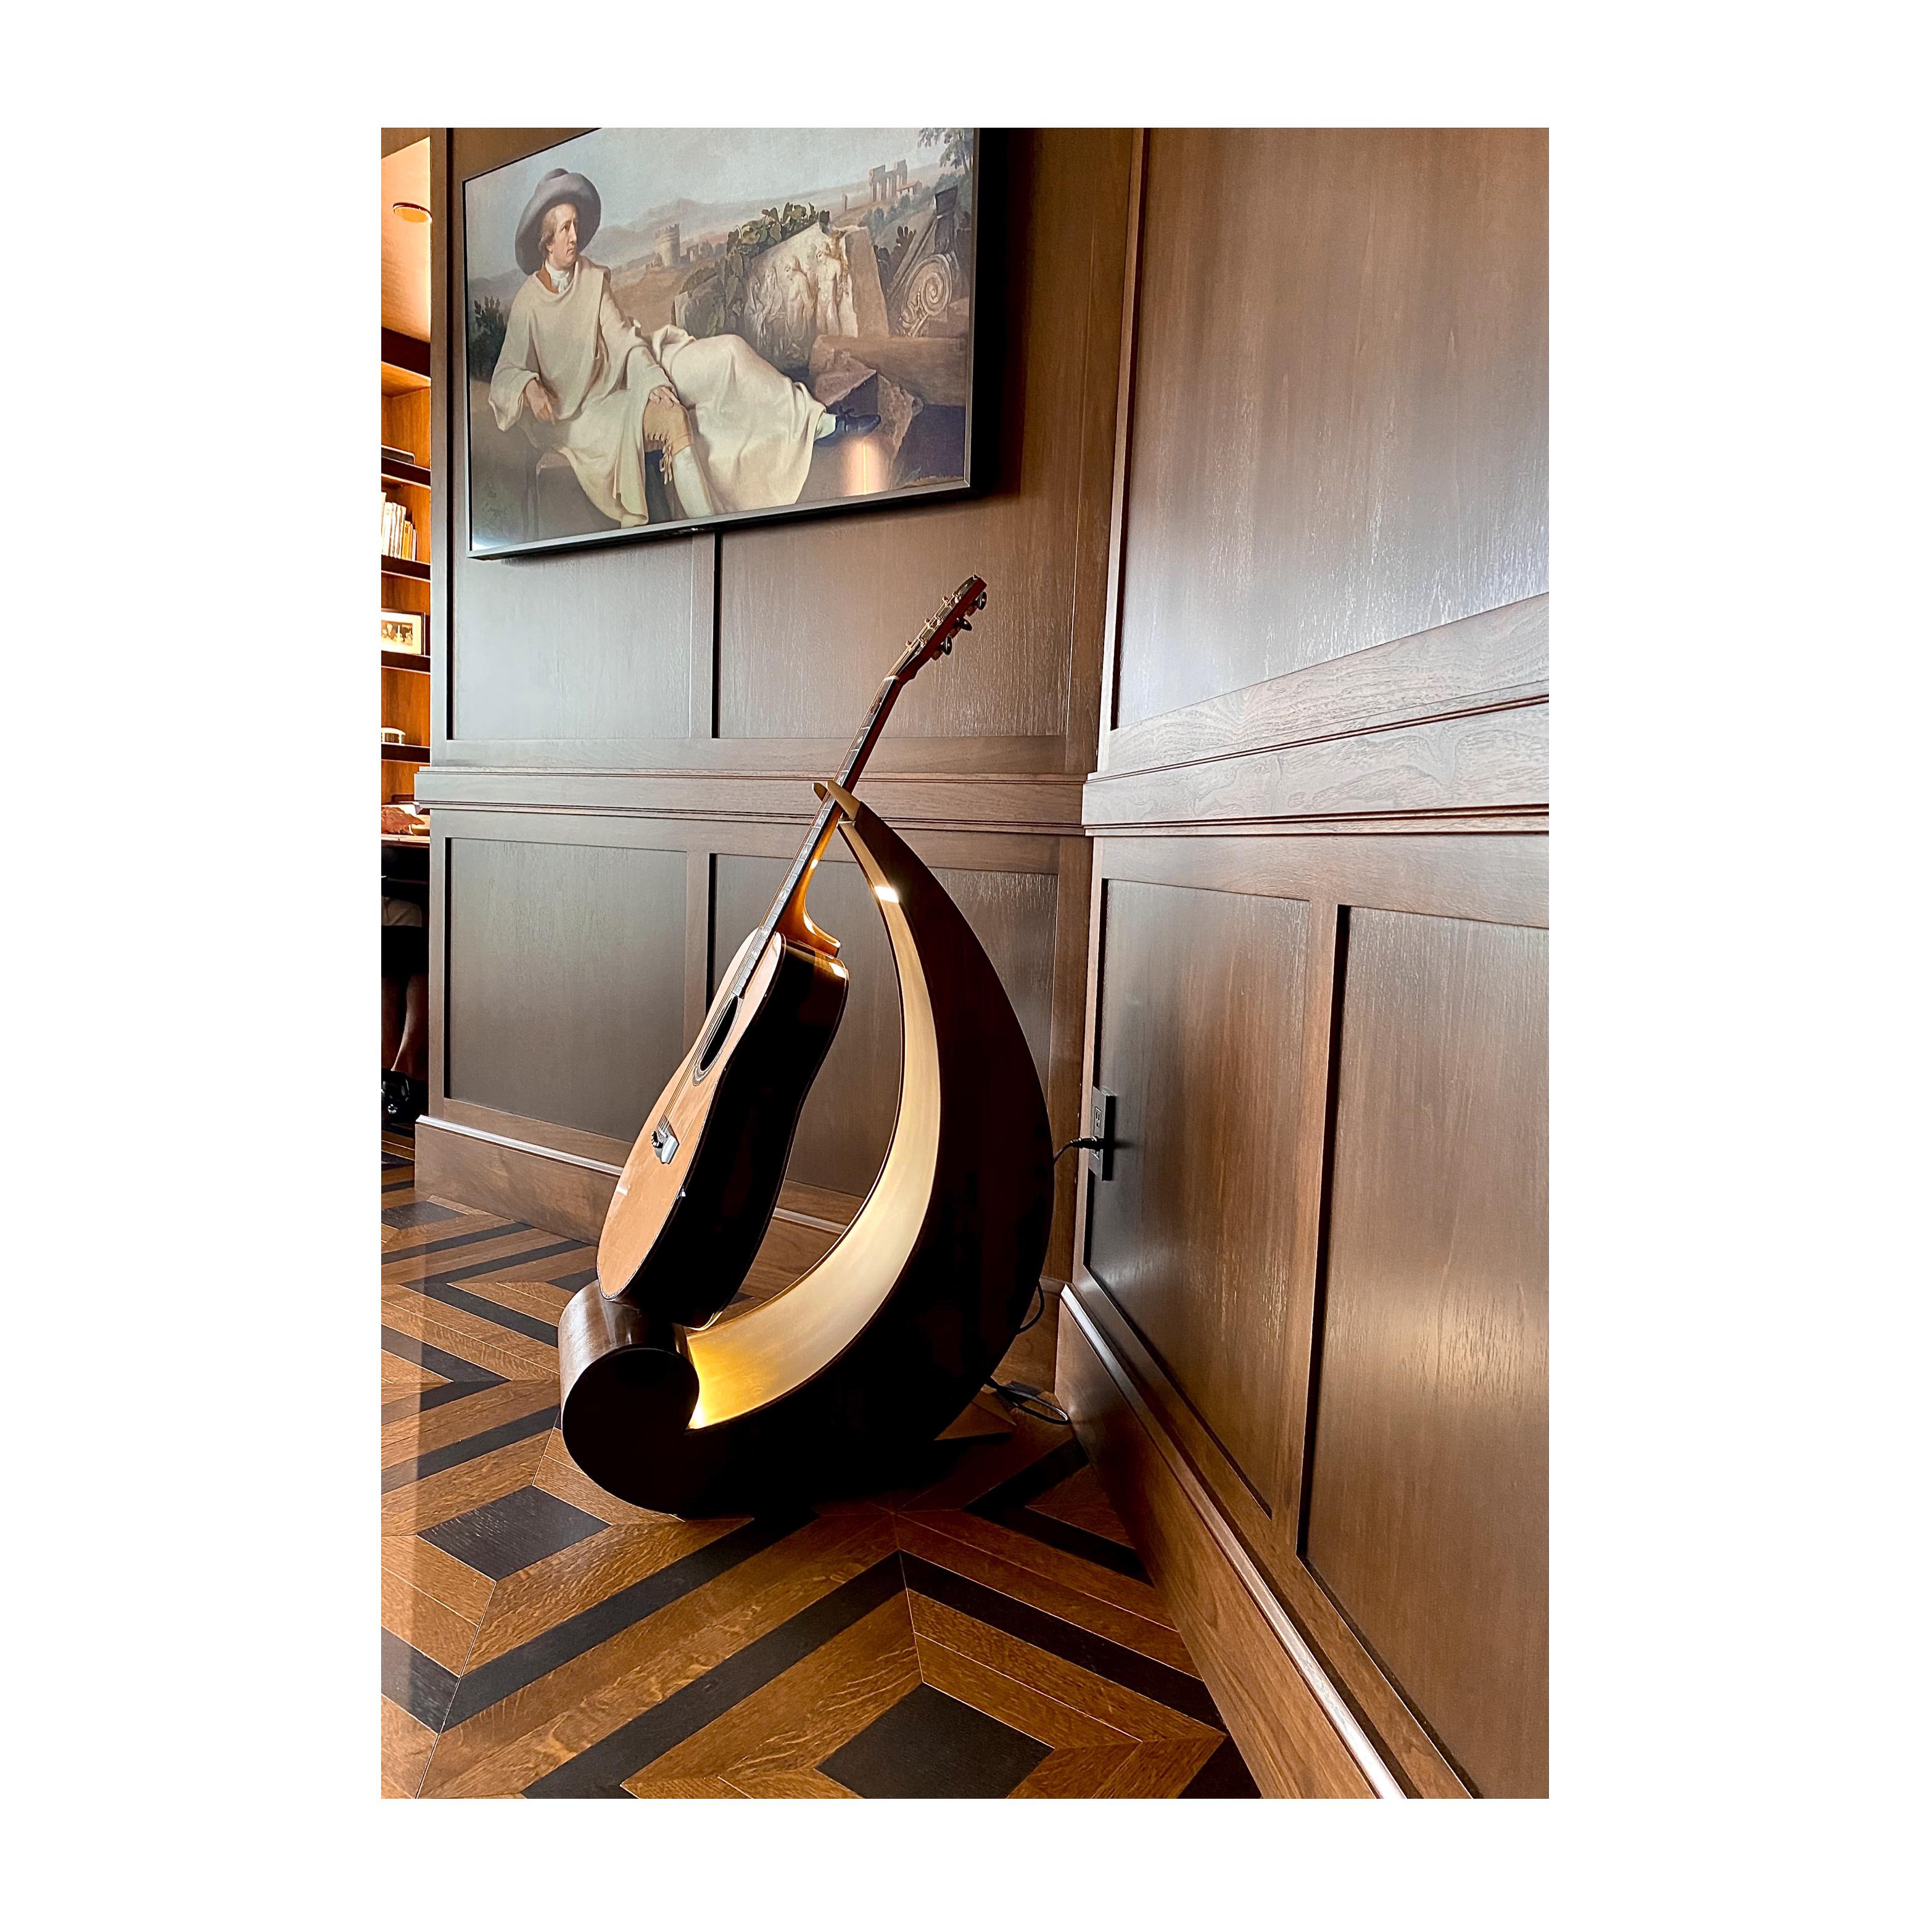 The guitar stand is a stunning piece of functional art that is inspired by the shape of a bass clef note. The stand's sculptural shape is both modern and timeless, and it provides a stable and secure resting place for your guitar. The back support